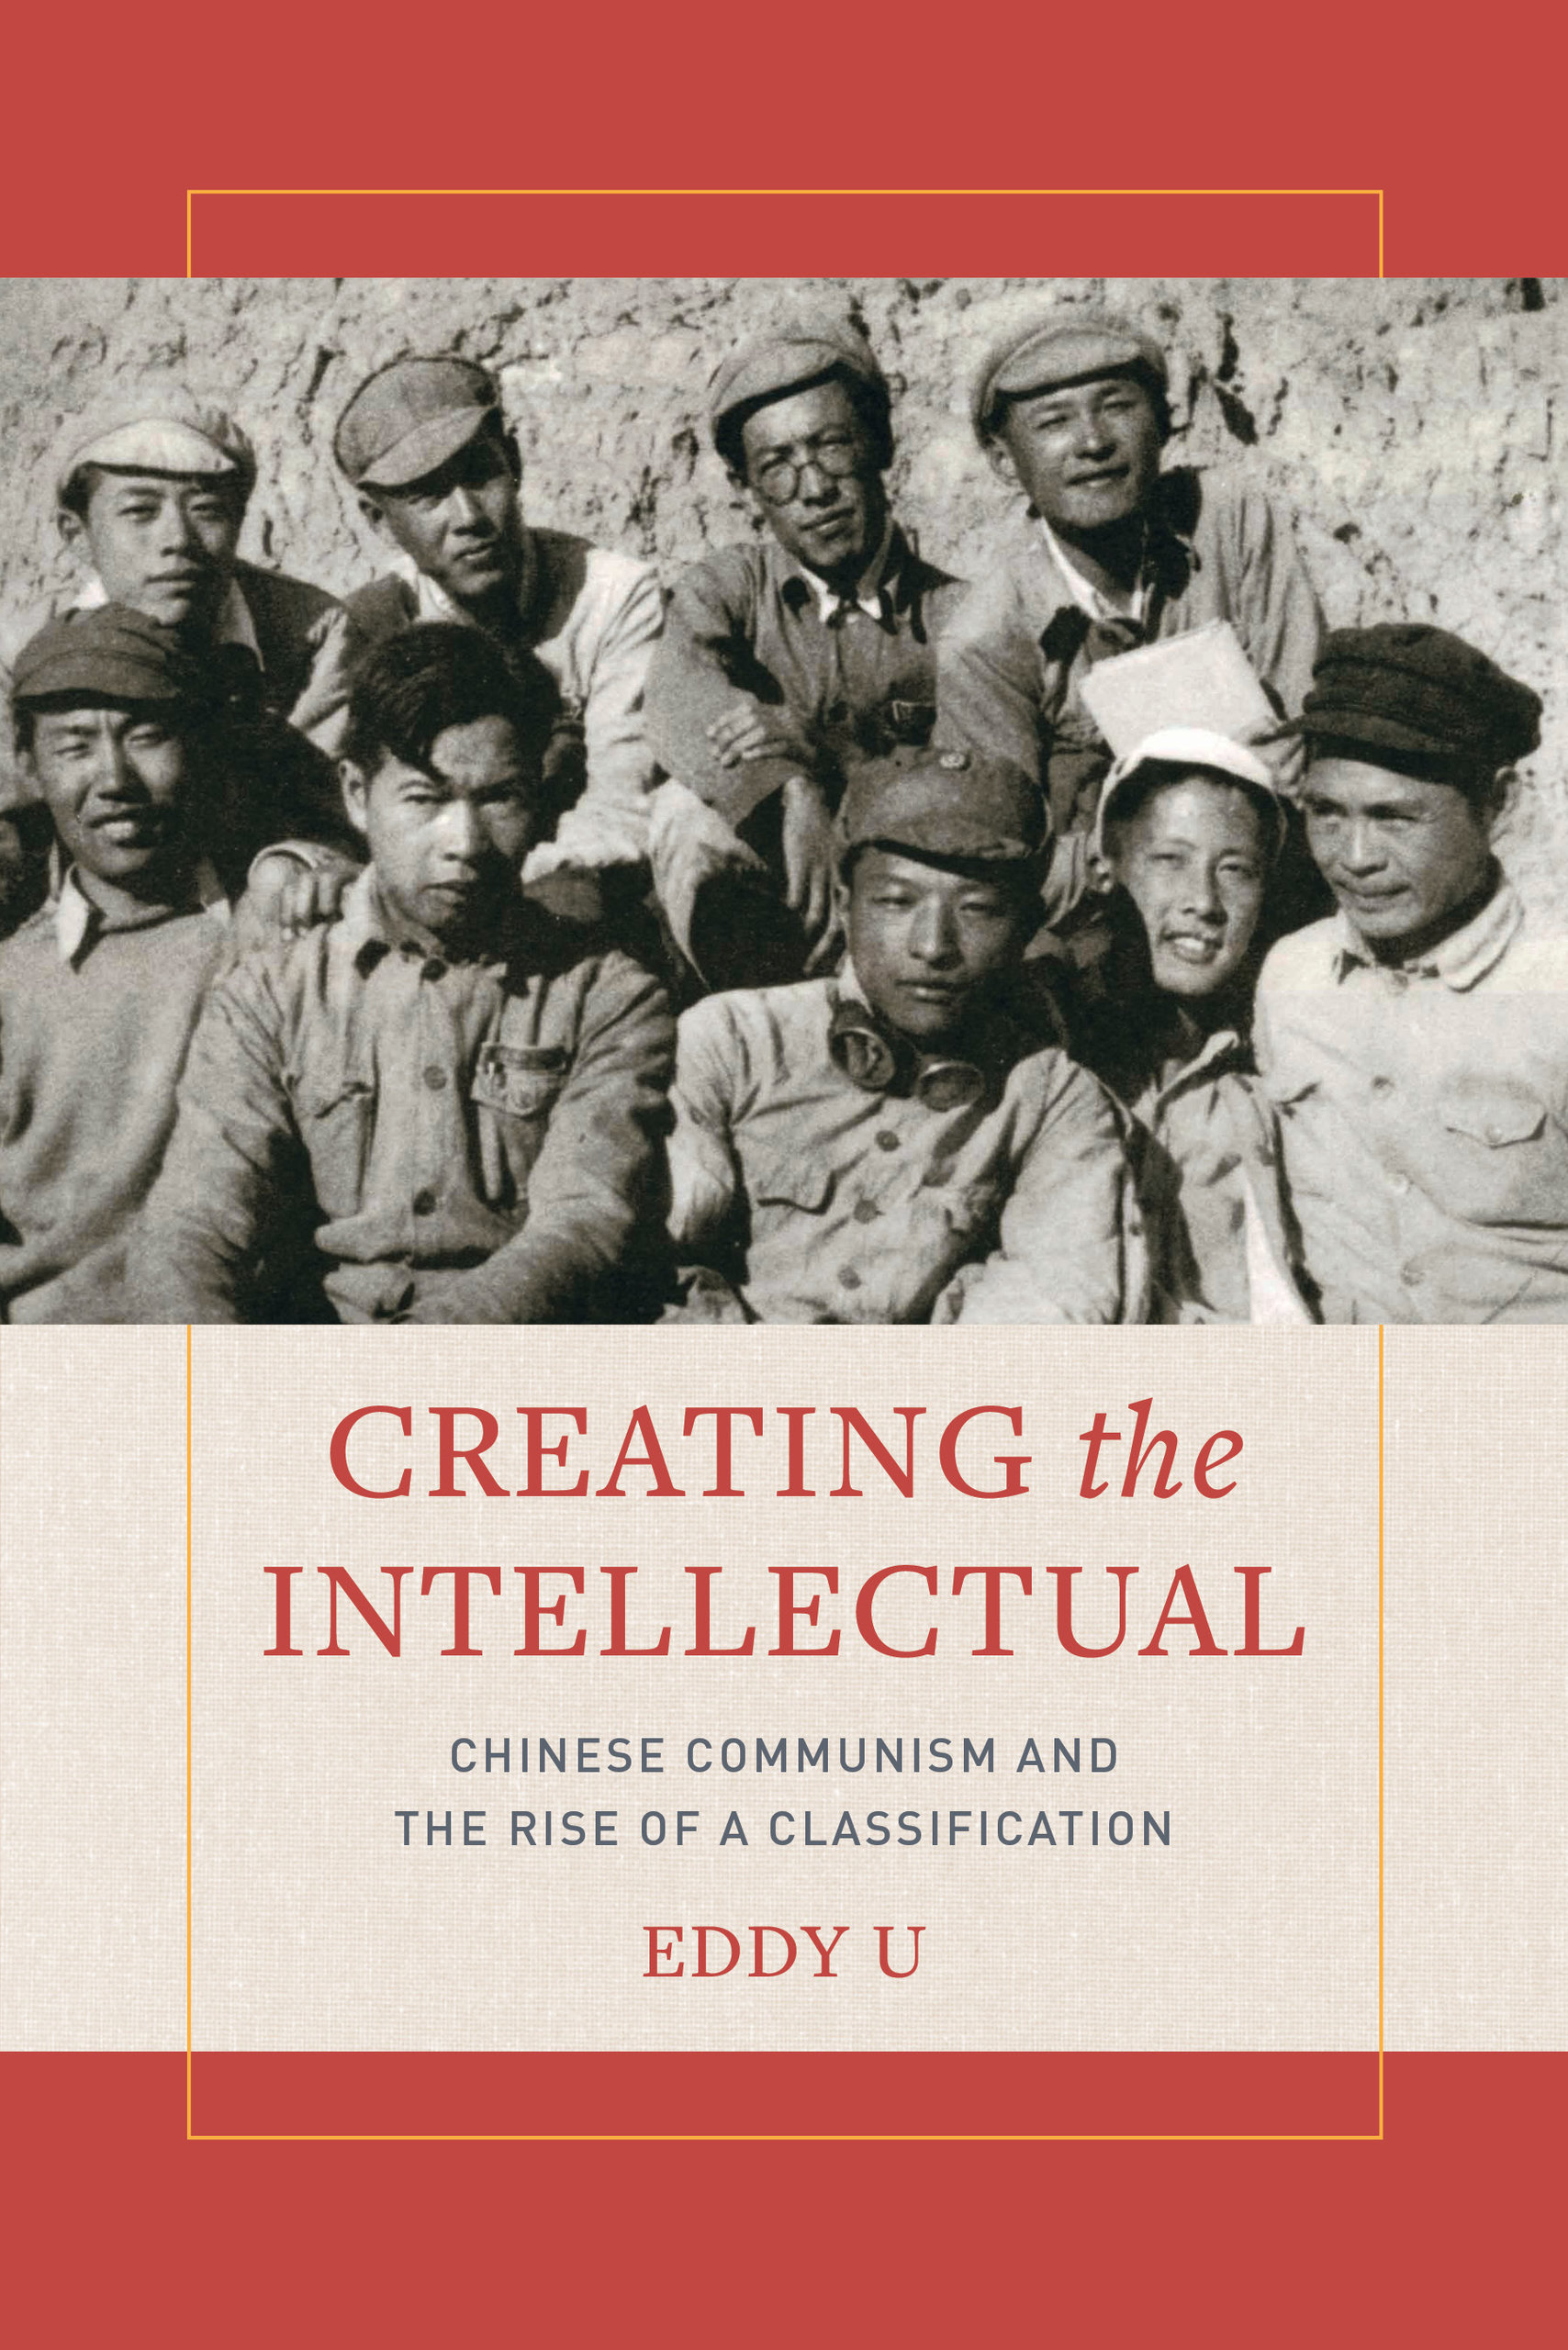 Cover of book with title Creating the Intellectual and image of nine men in China